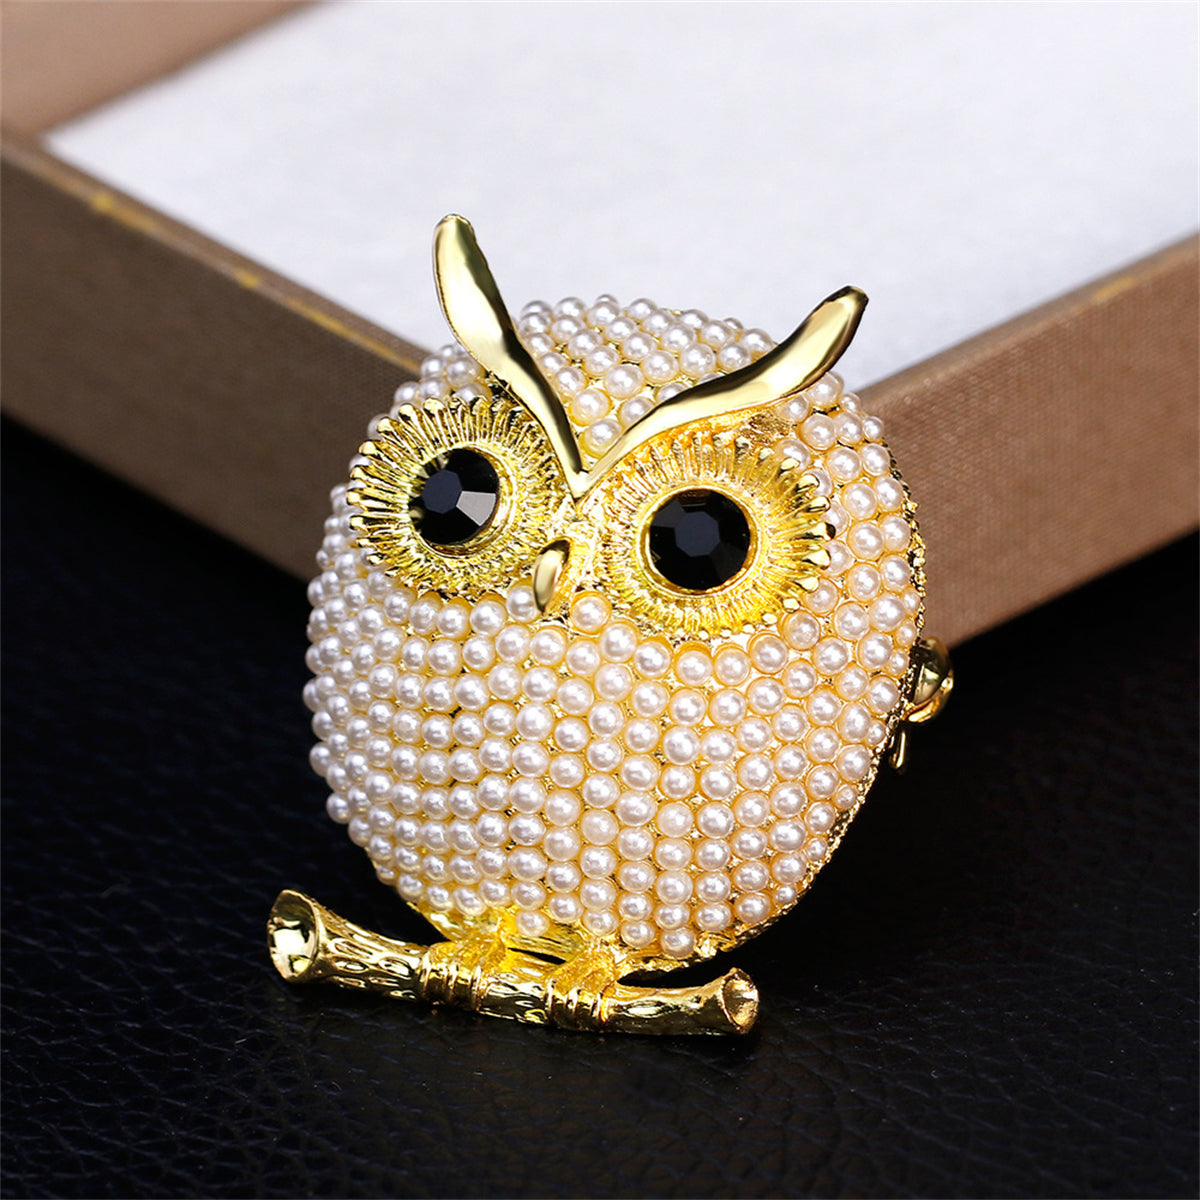 Cubic Zirconia & Pearl 18K Gold-Plated Owl Brooch